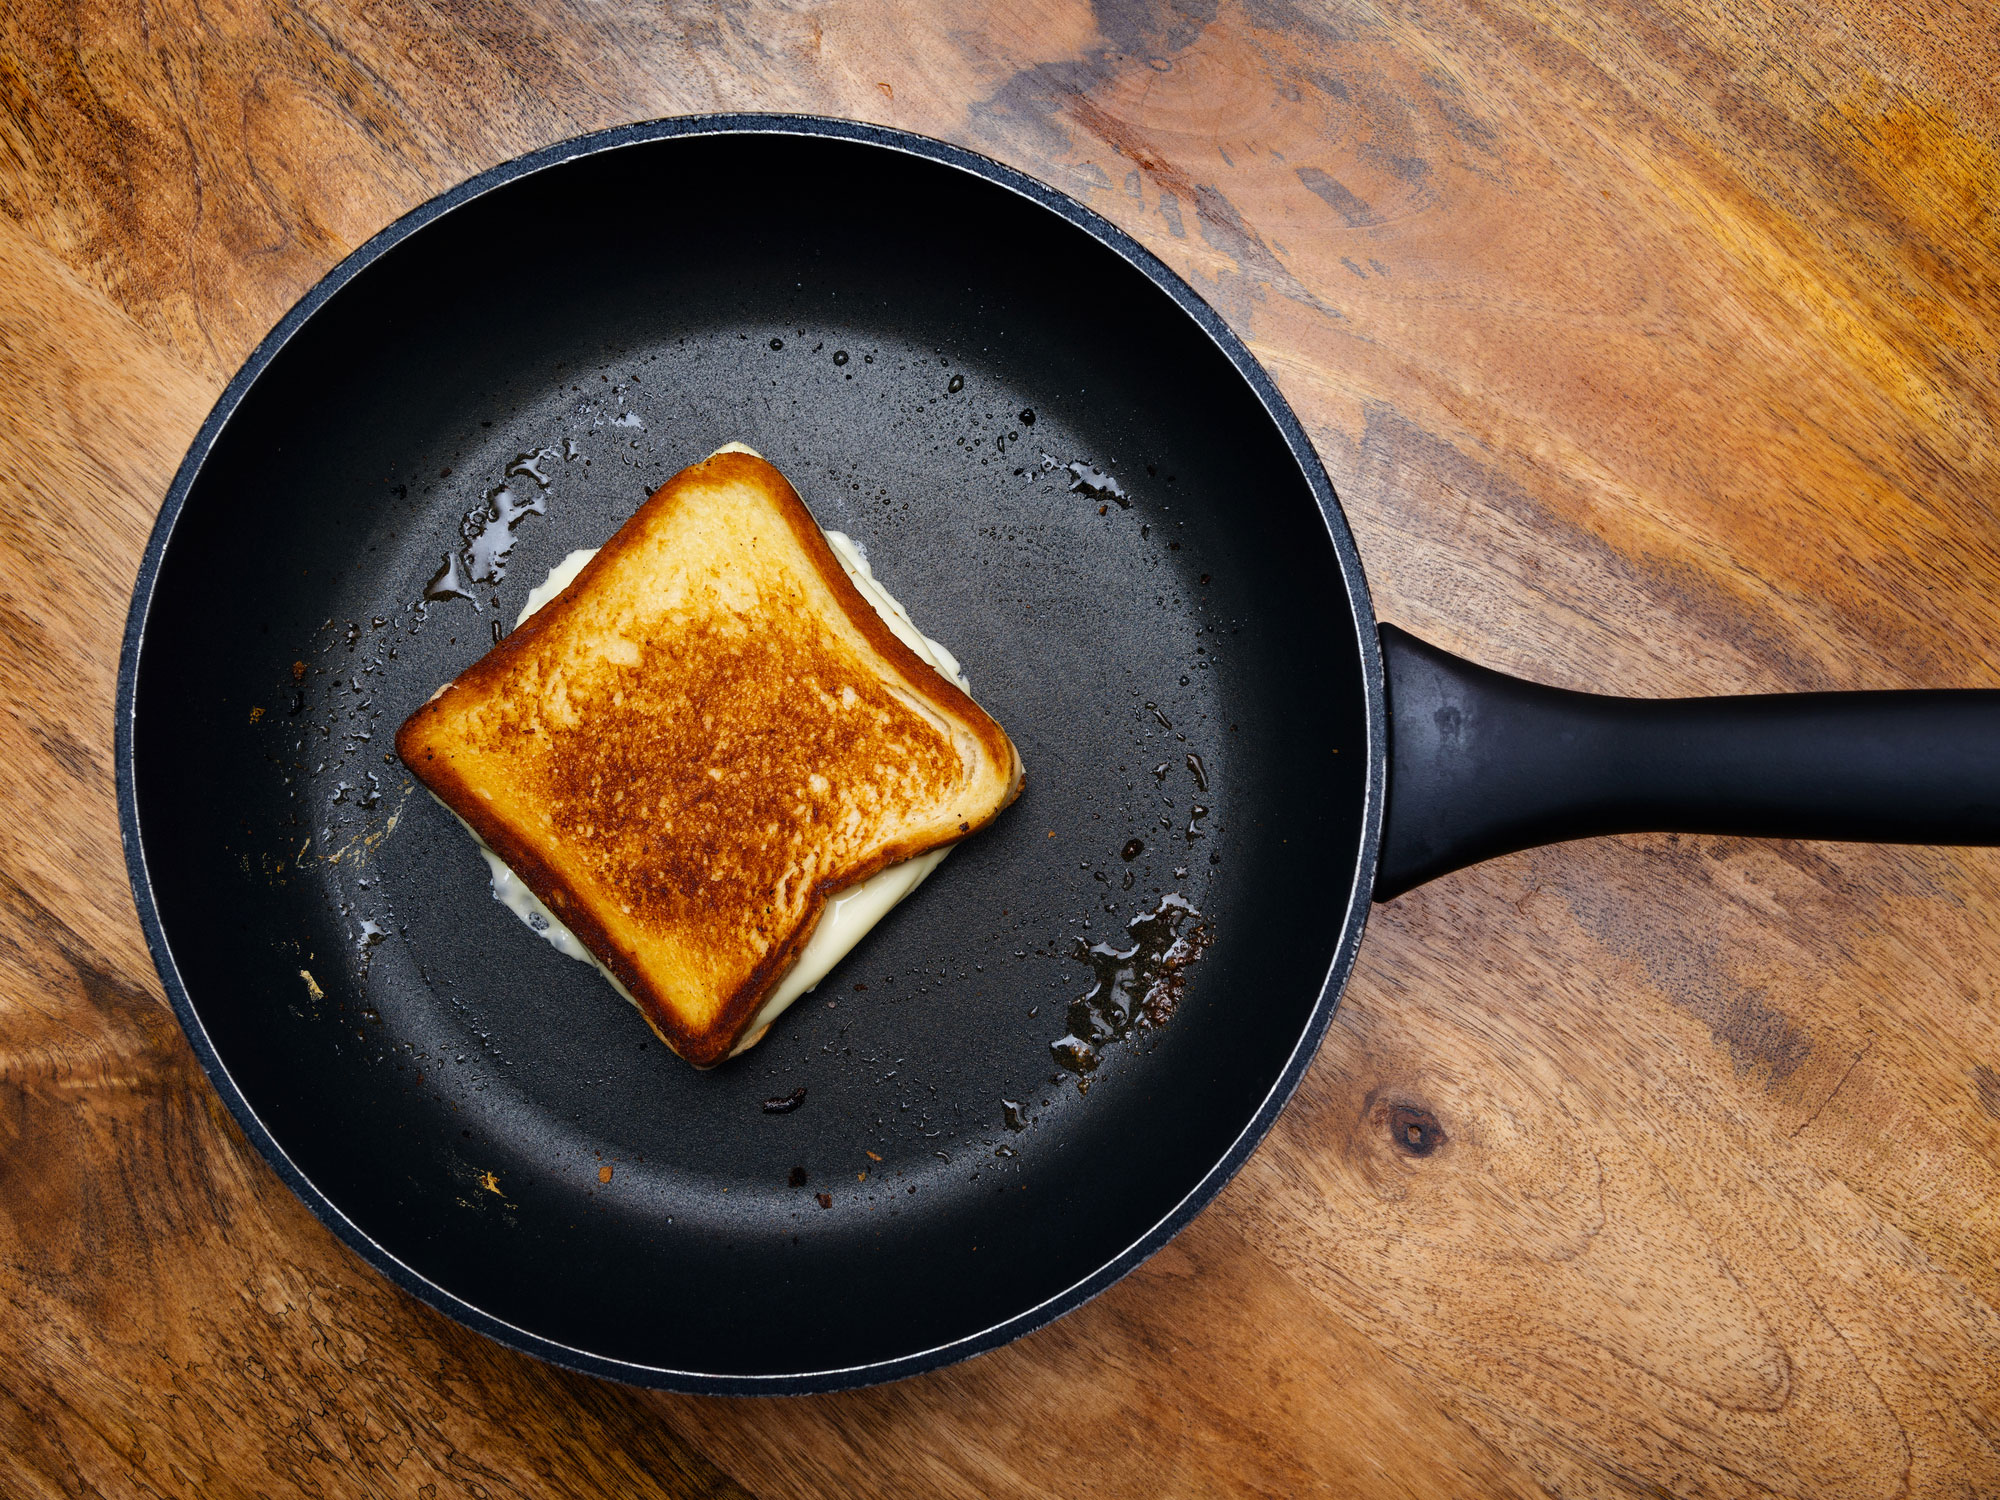 https://static.onecms.io/wp-content/uploads/sites/19/2017/02/21/grilled-cheese-in-cast-iron-skillet.jpg